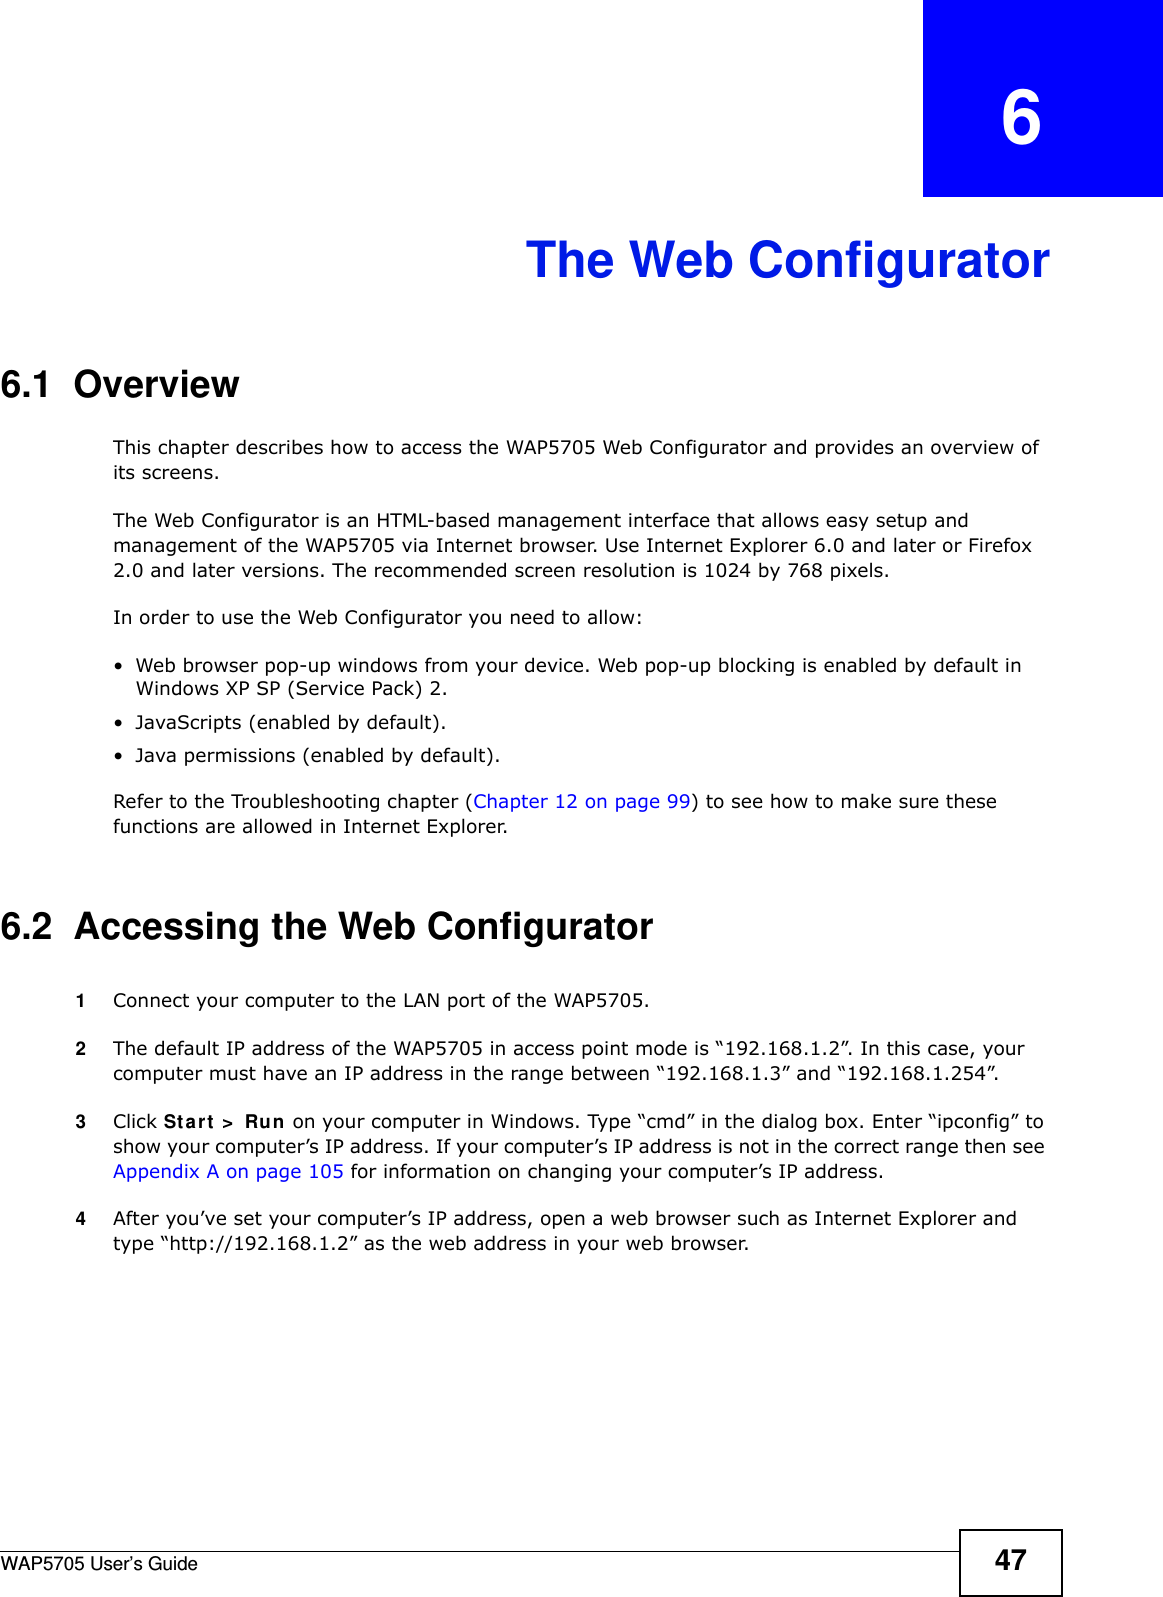 WAP5705 User’s Guide 47CHAPTER   6The Web Configurator6.1  OverviewThis chapter describes how to access the WAP5705 Web Configurator and provides an overview of its screens.The Web Configurator is an HTML-based management interface that allows easy setup and management of the WAP5705 via Internet browser. Use Internet Explorer 6.0 and later or Firefox 2.0 and later versions. The recommended screen resolution is 1024 by 768 pixels.In order to use the Web Configurator you need to allow:• Web browser pop-up windows from your device. Web pop-up blocking is enabled by default in Windows XP SP (Service Pack) 2.• JavaScripts (enabled by default).• Java permissions (enabled by default).Refer to the Troubleshooting chapter (Chapter 12 on page 99) to see how to make sure these functions are allowed in Internet Explorer.6.2  Accessing the Web Configurator 1Connect your computer to the LAN port of the WAP5705. 2The default IP address of the WAP5705 in access point mode is “192.168.1.2”. In this case, your computer must have an IP address in the range between “192.168.1.3” and “192.168.1.254”.3Click St a r t  &gt;  Run  on your computer in Windows. Type “cmd” in the dialog box. Enter “ipconfig” to show your computer’s IP address. If your computer’s IP address is not in the correct range then see Appendix A on page 105 for information on changing your computer’s IP address.4After you’ve set your computer’s IP address, open a web browser such as Internet Explorer and type “http://192.168.1.2” as the web address in your web browser.